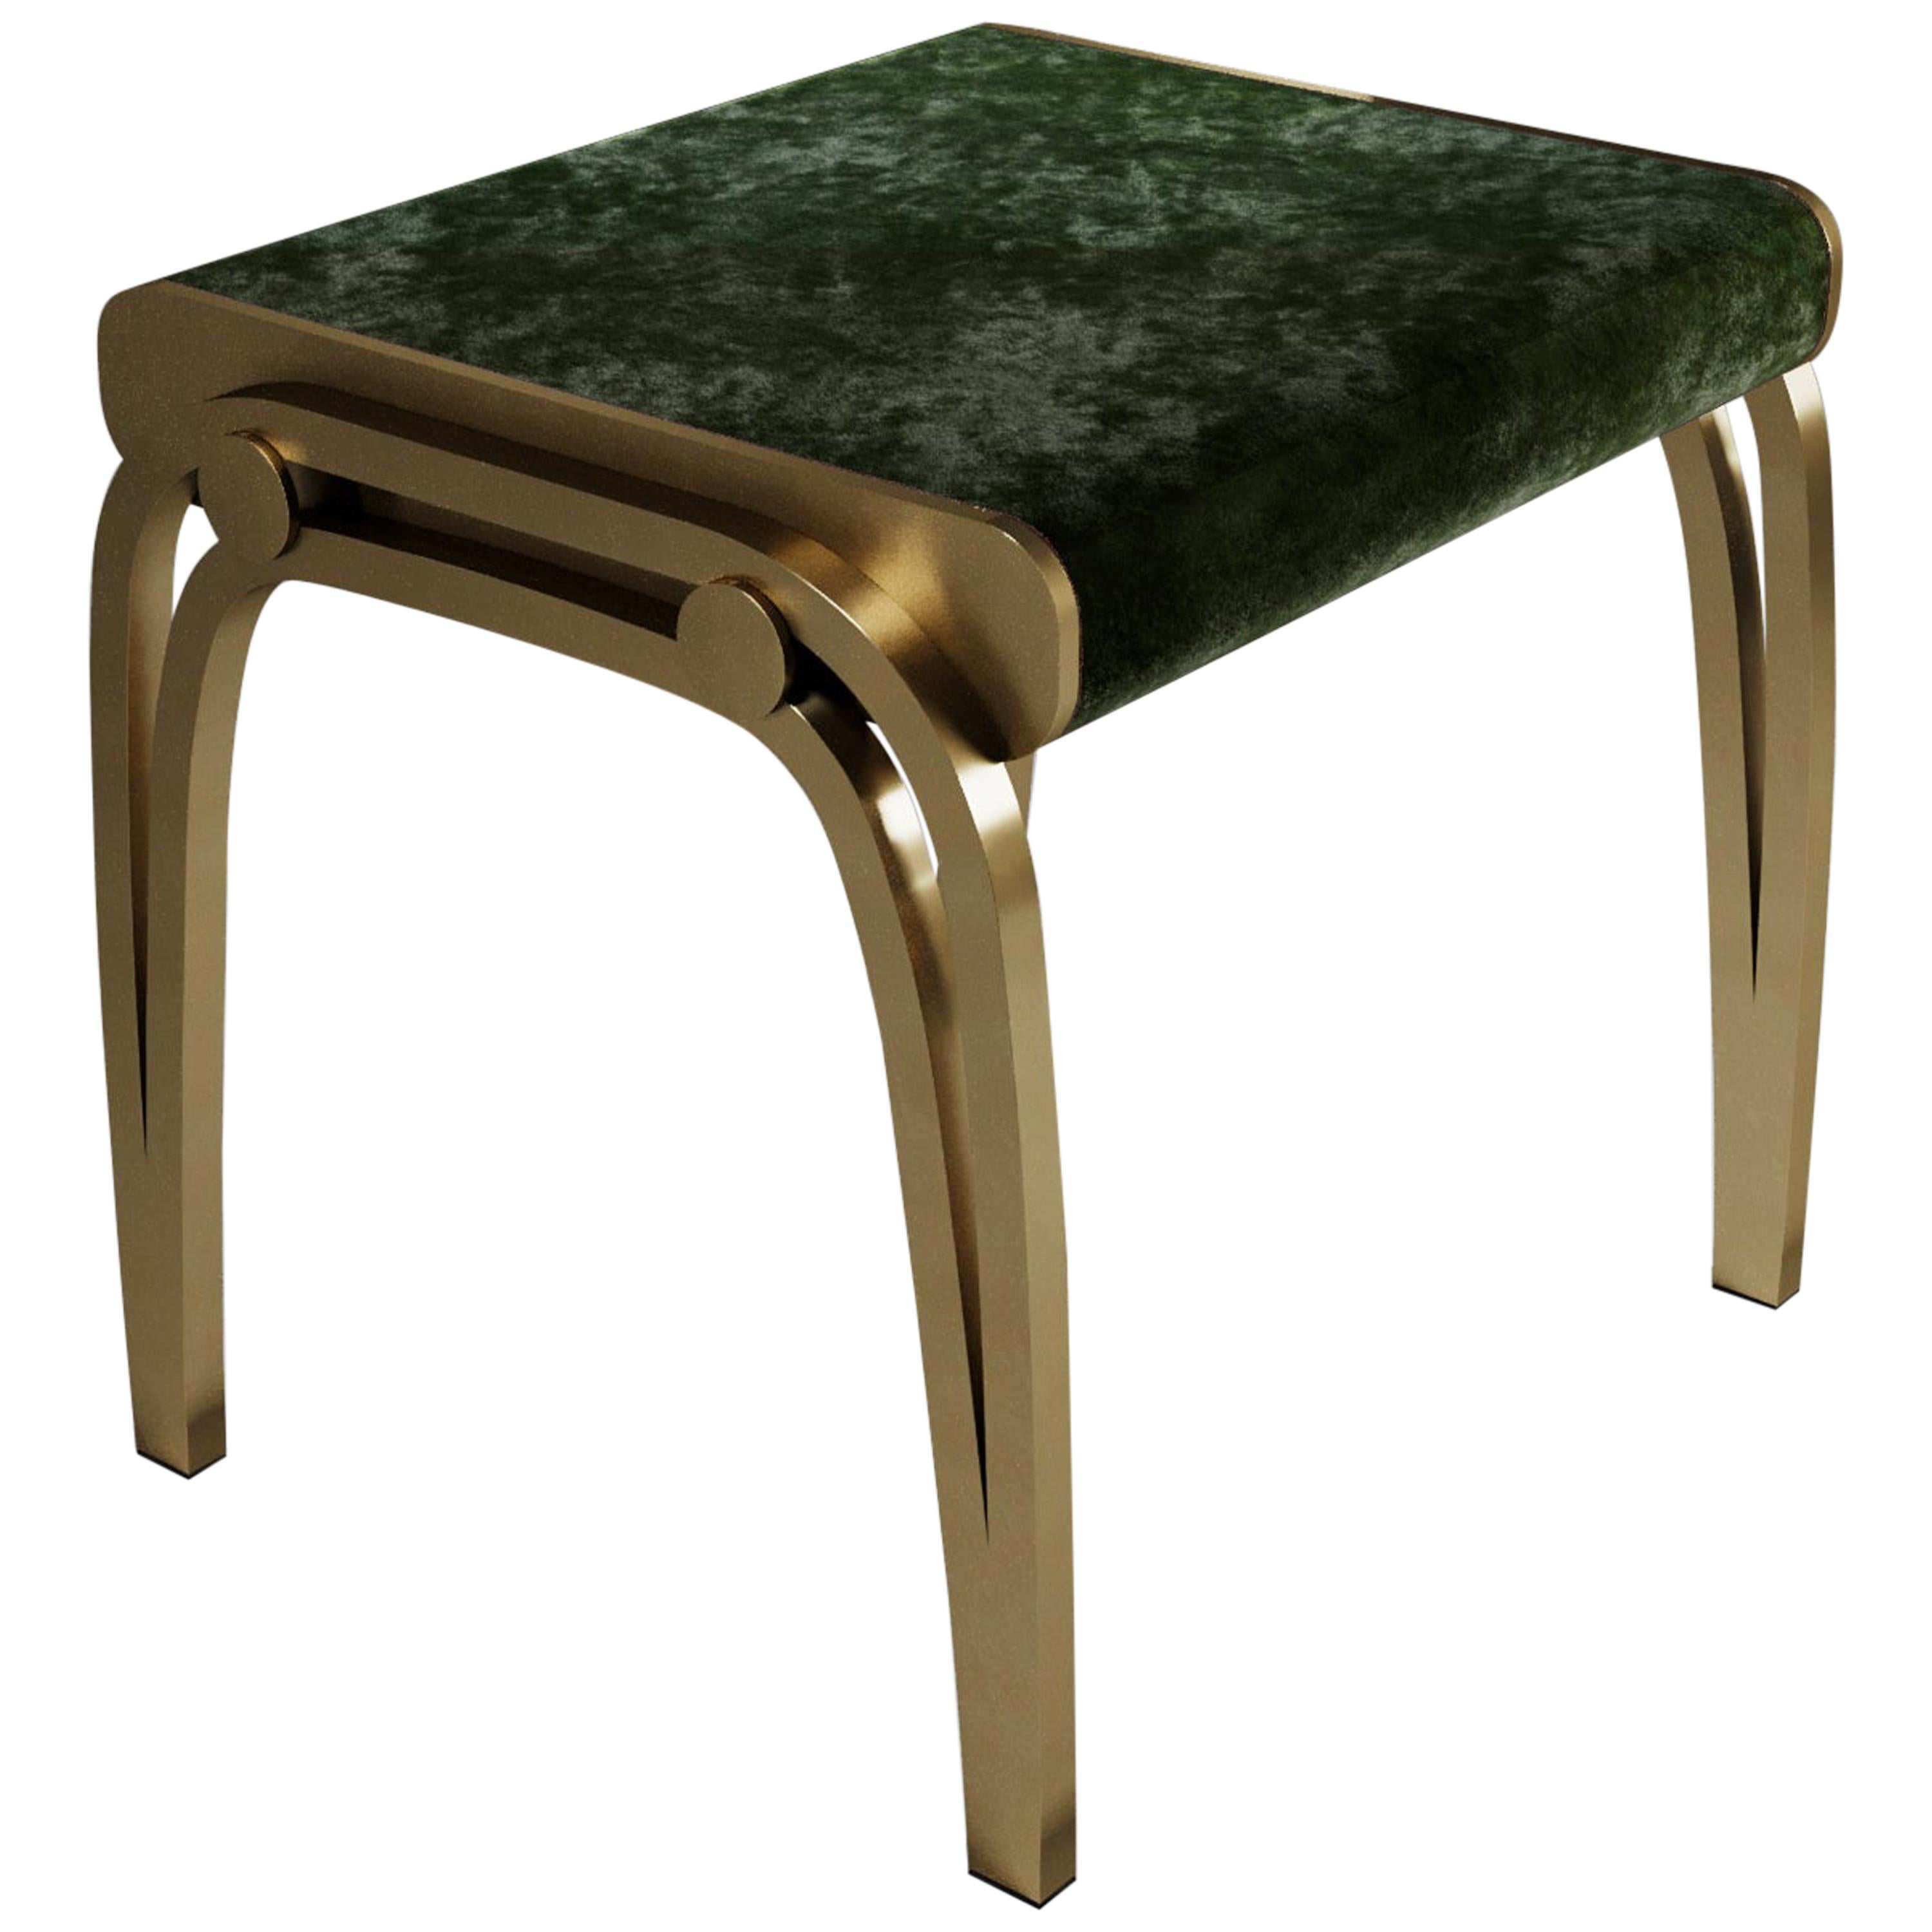 The limited edition Victoria stool by R&Y Augousti is a sophisticated piece that provides comfort, whilst retaining its elegant and luxurious aesthetic. The the seat is upholstered in a dark emerald green-hue Pierre Frey Velvet, with a bronze-patina